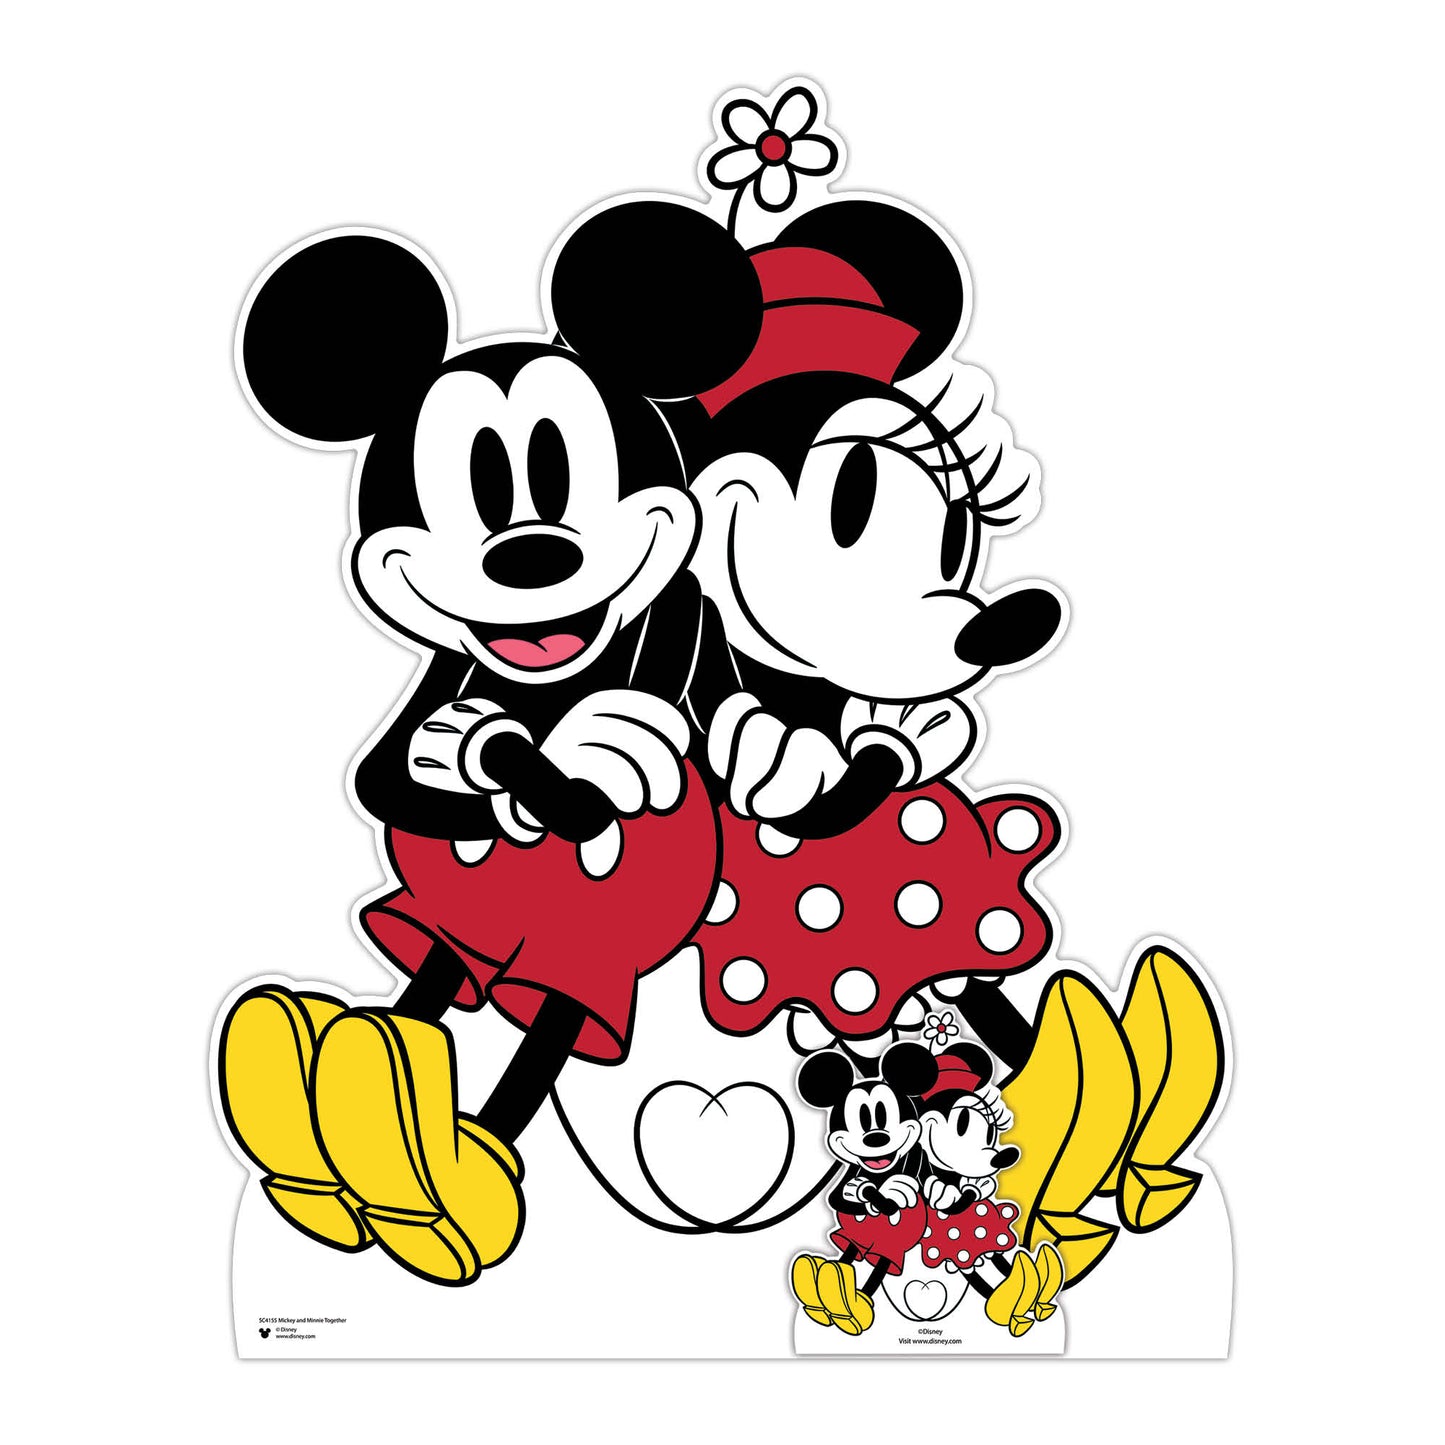 SC4155 Mickey & Minnie Cute Couple Together Cardboard Cut Out Height 118cm